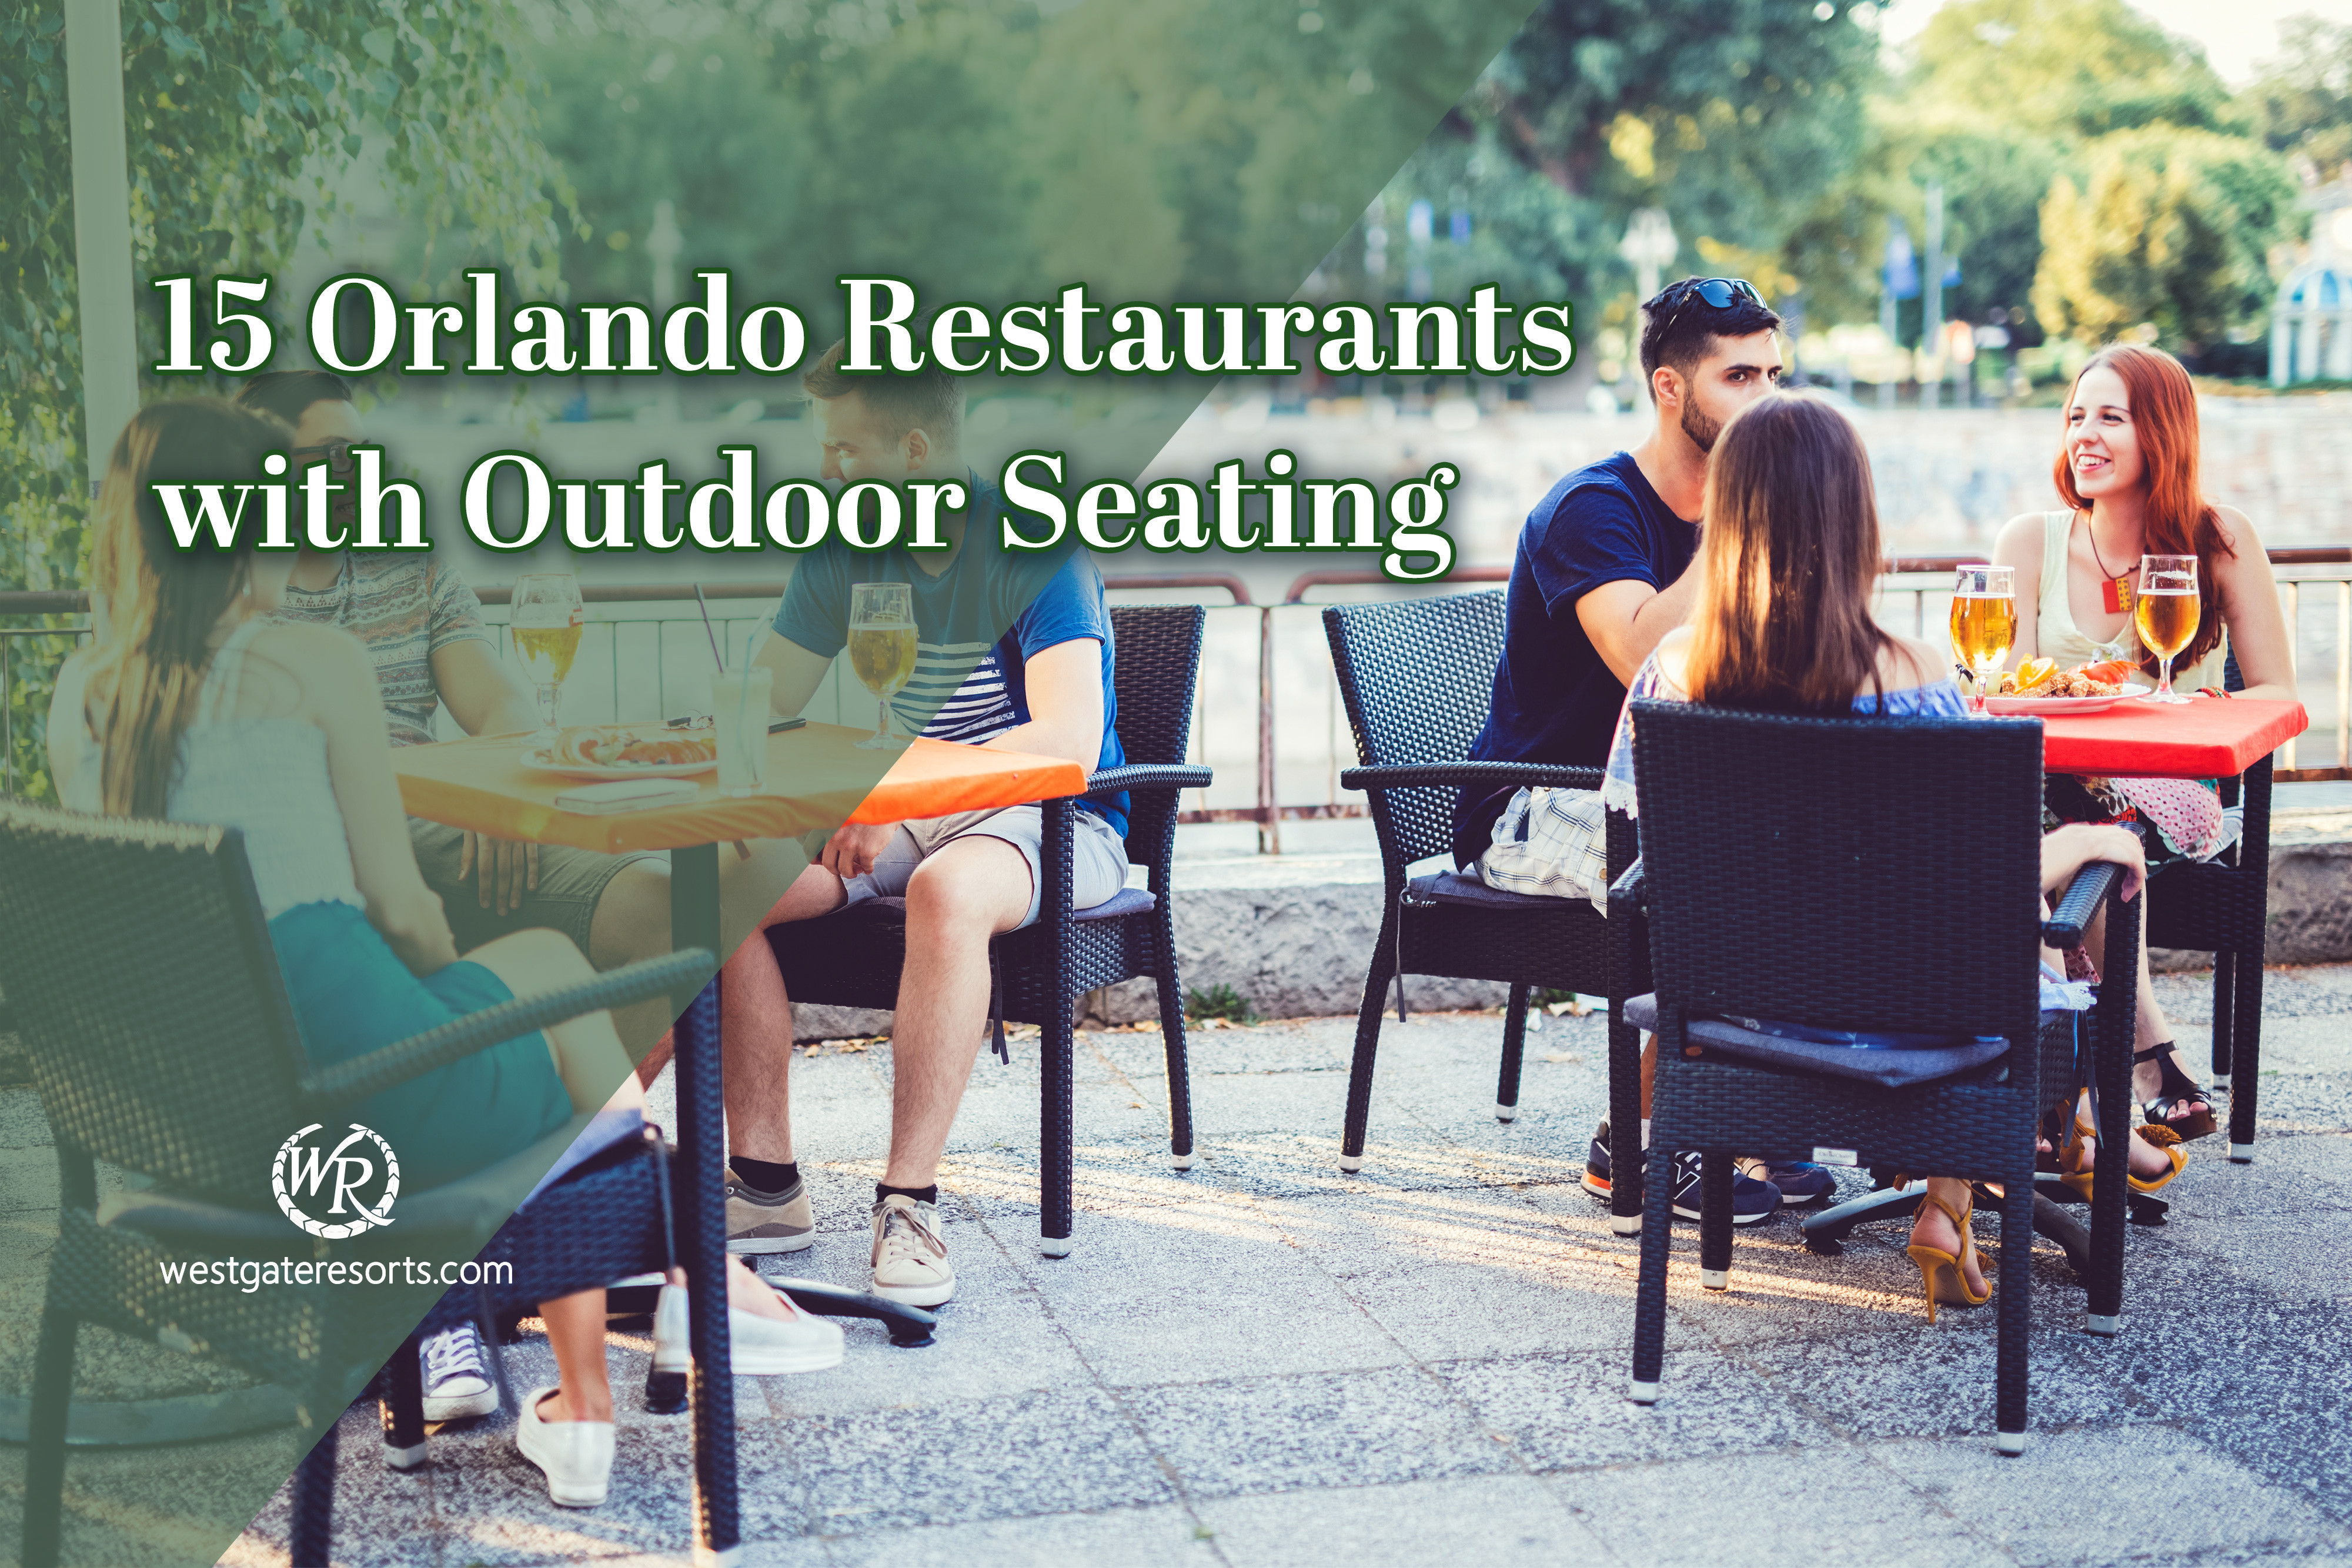 15 Orlando Restaurants with Outdoor Seating